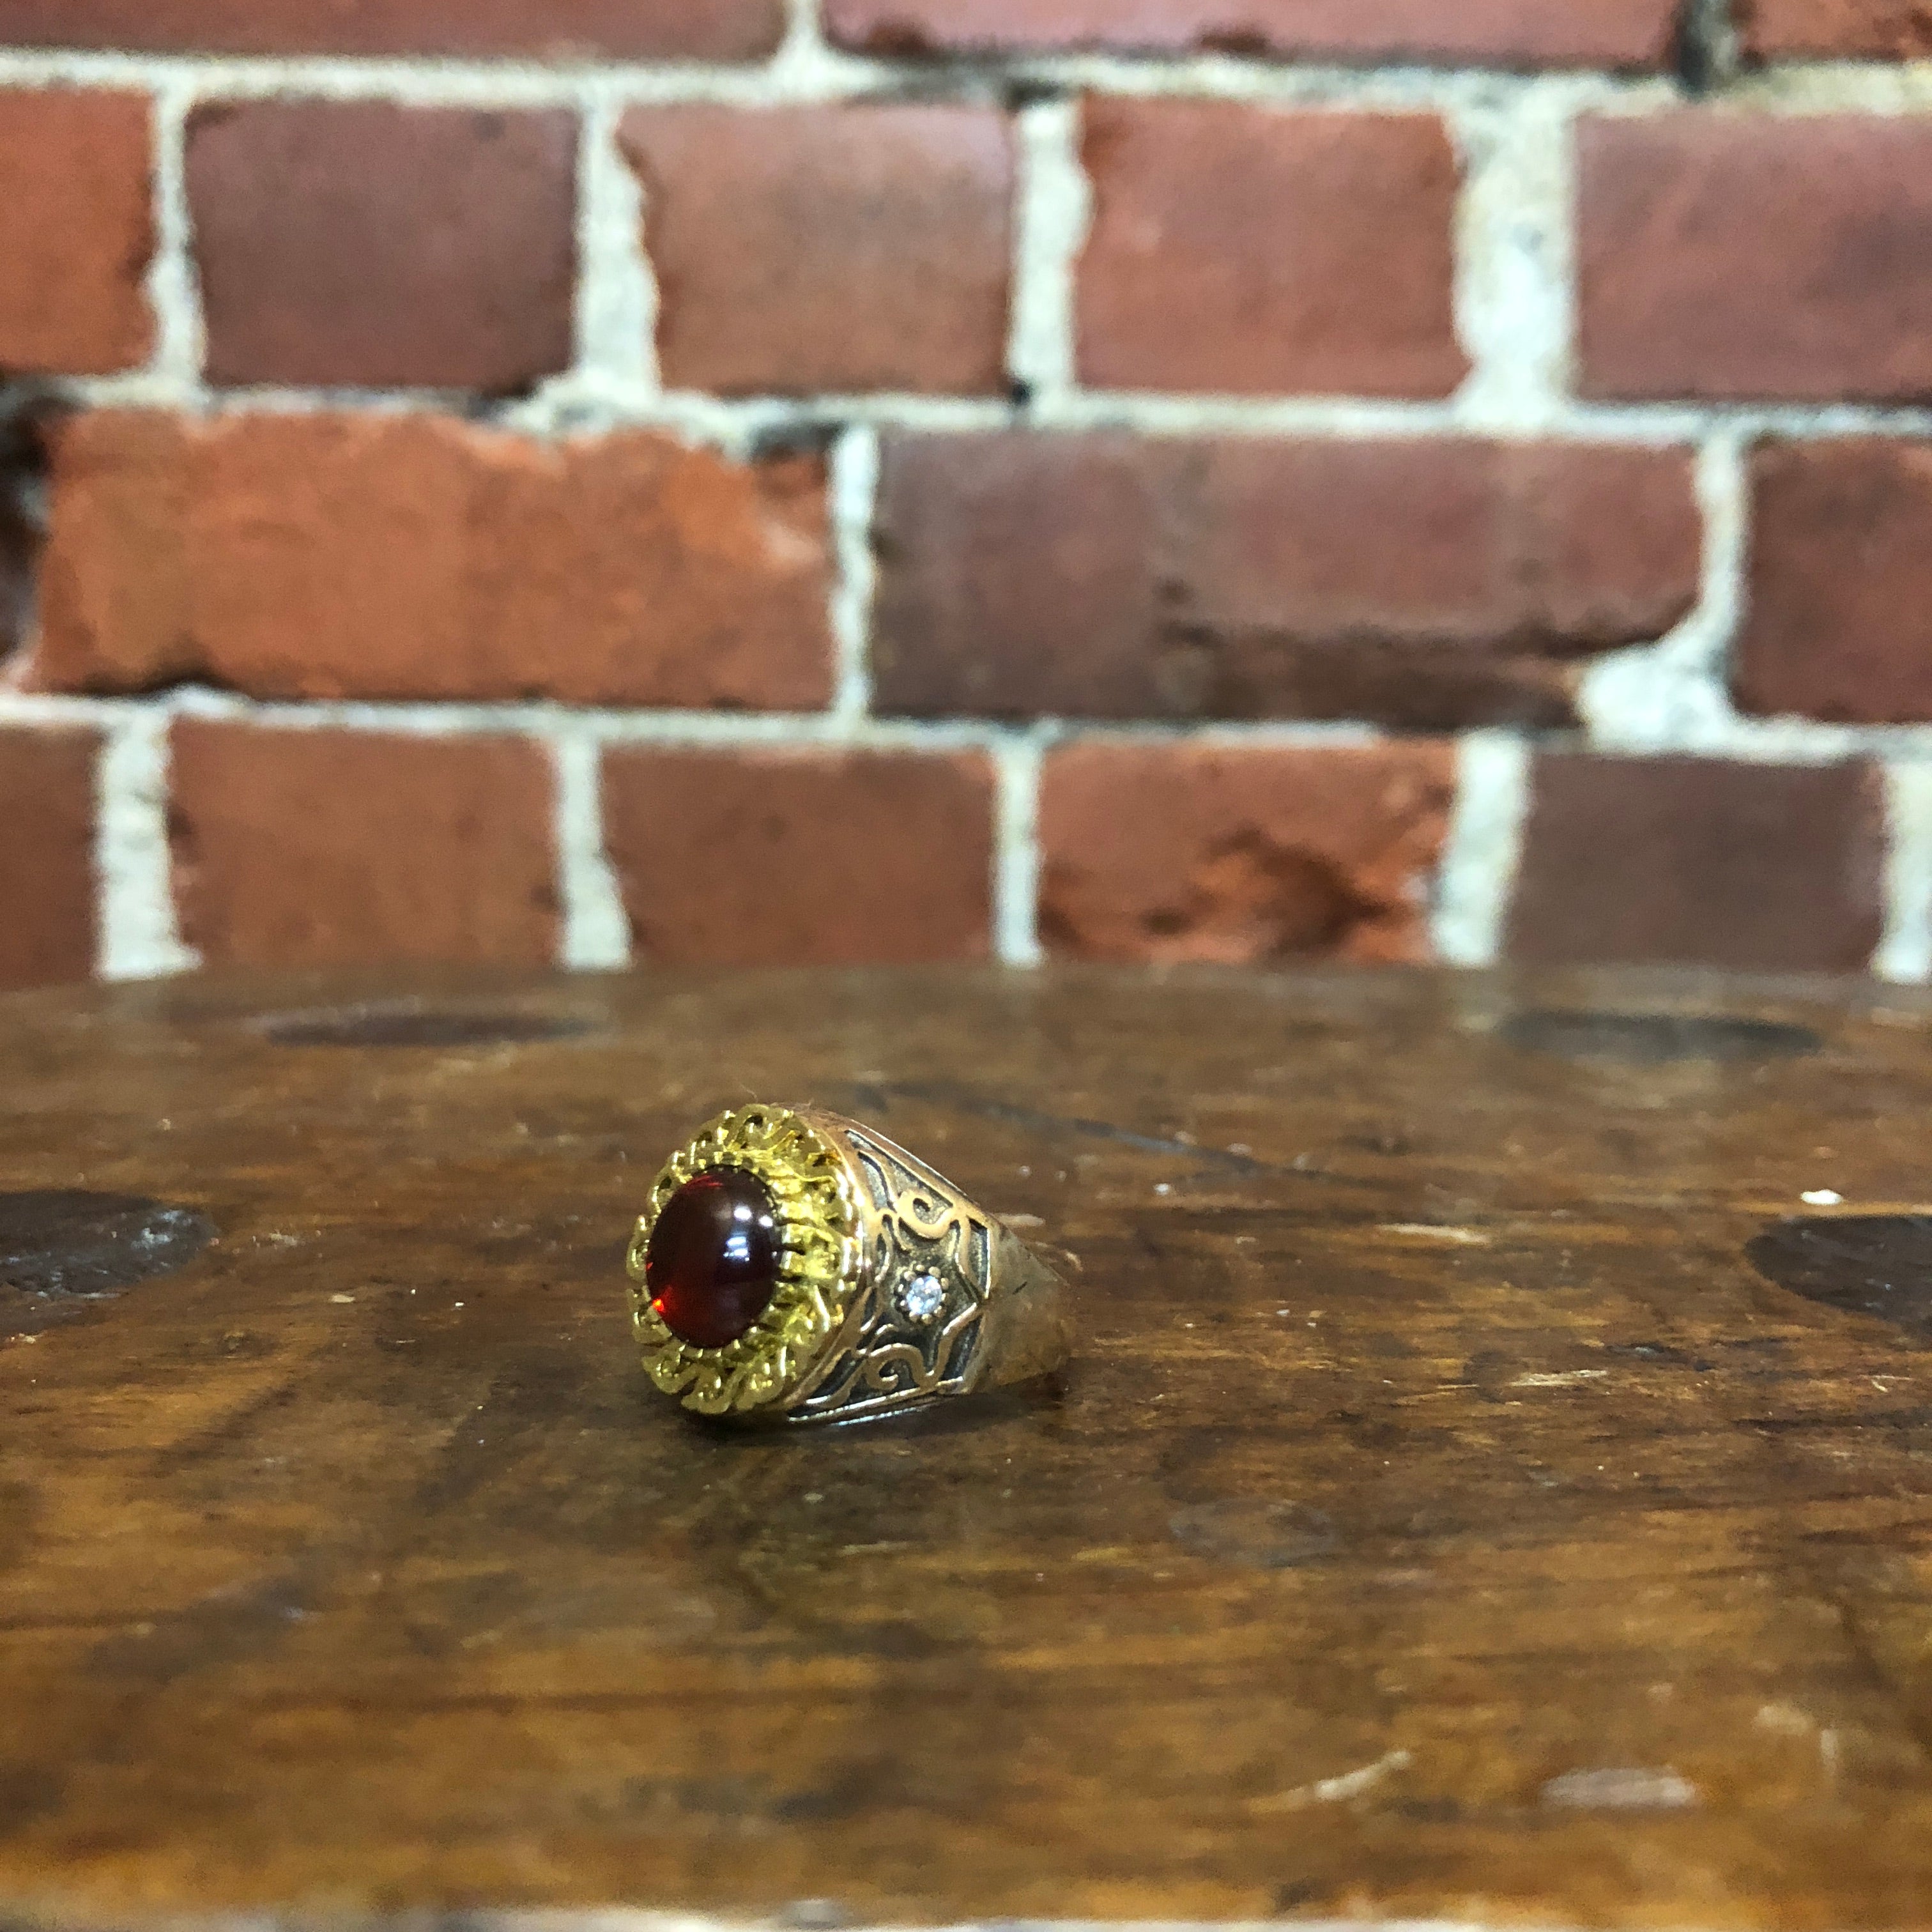 Sterling silver and garnet medieval kings style ring